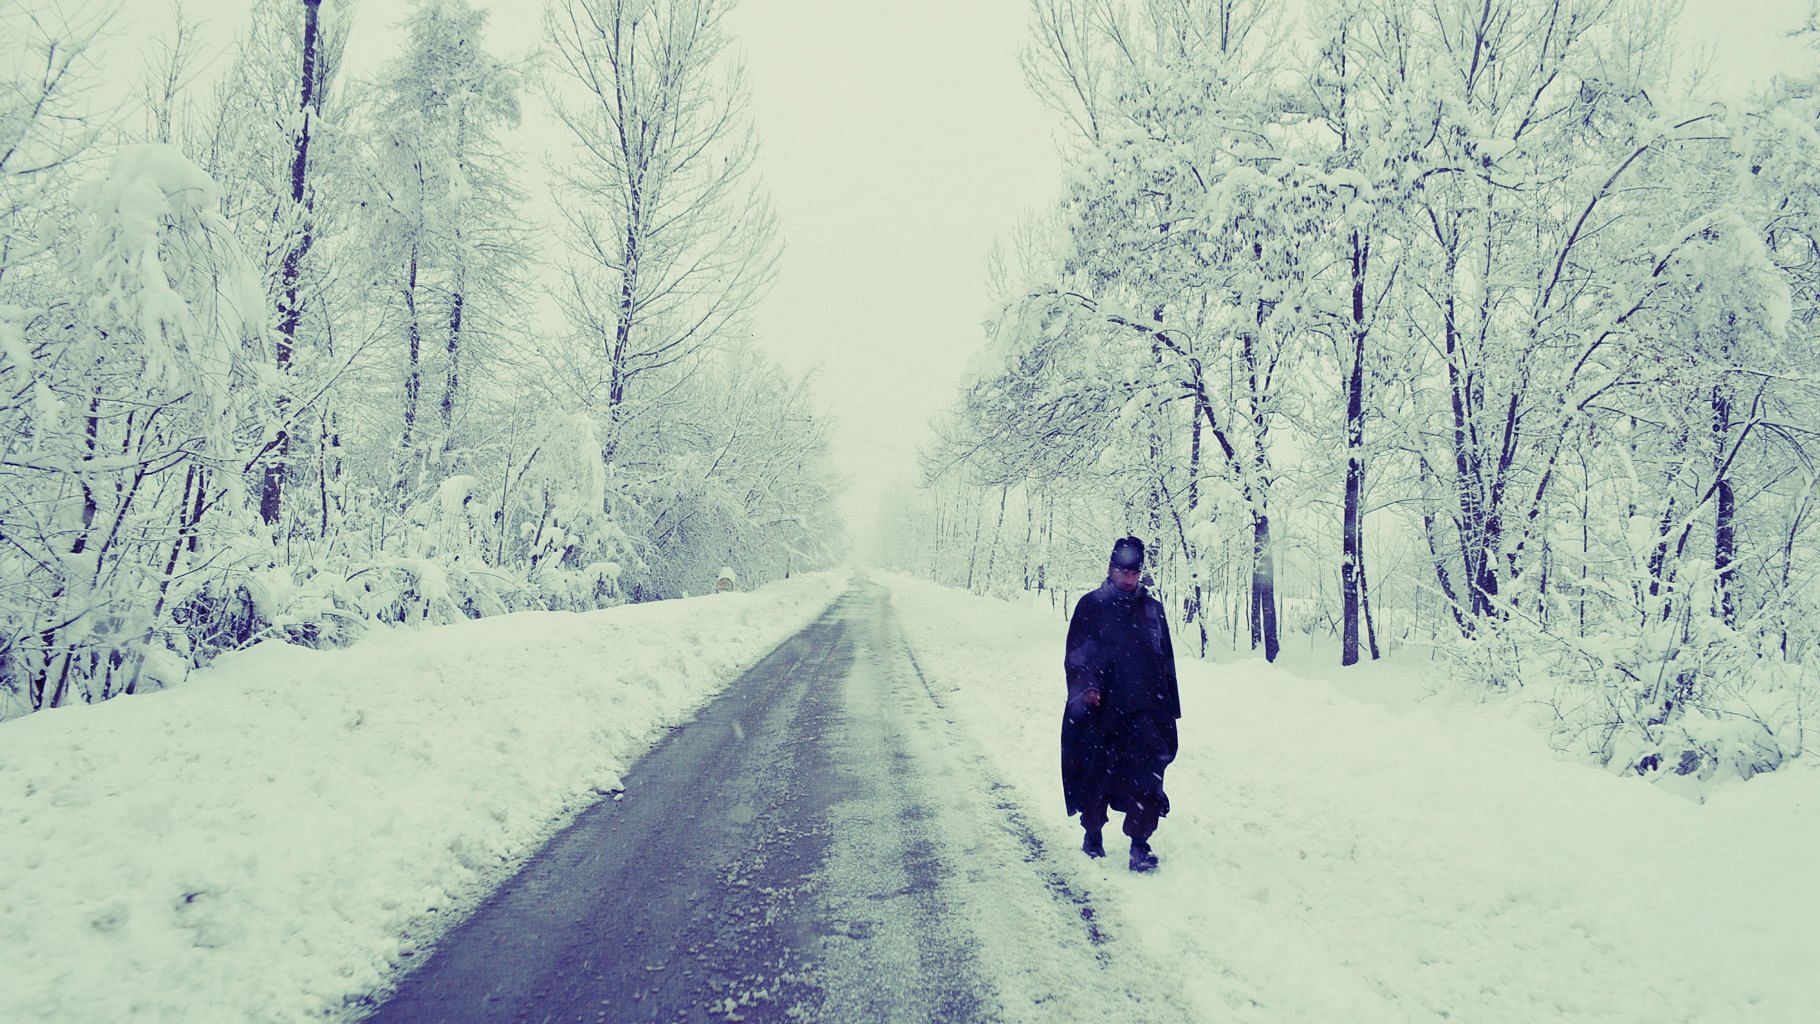 A Kashmiri man walks through a snow-covered road in Anantanag. Archival image used for representational purposes.